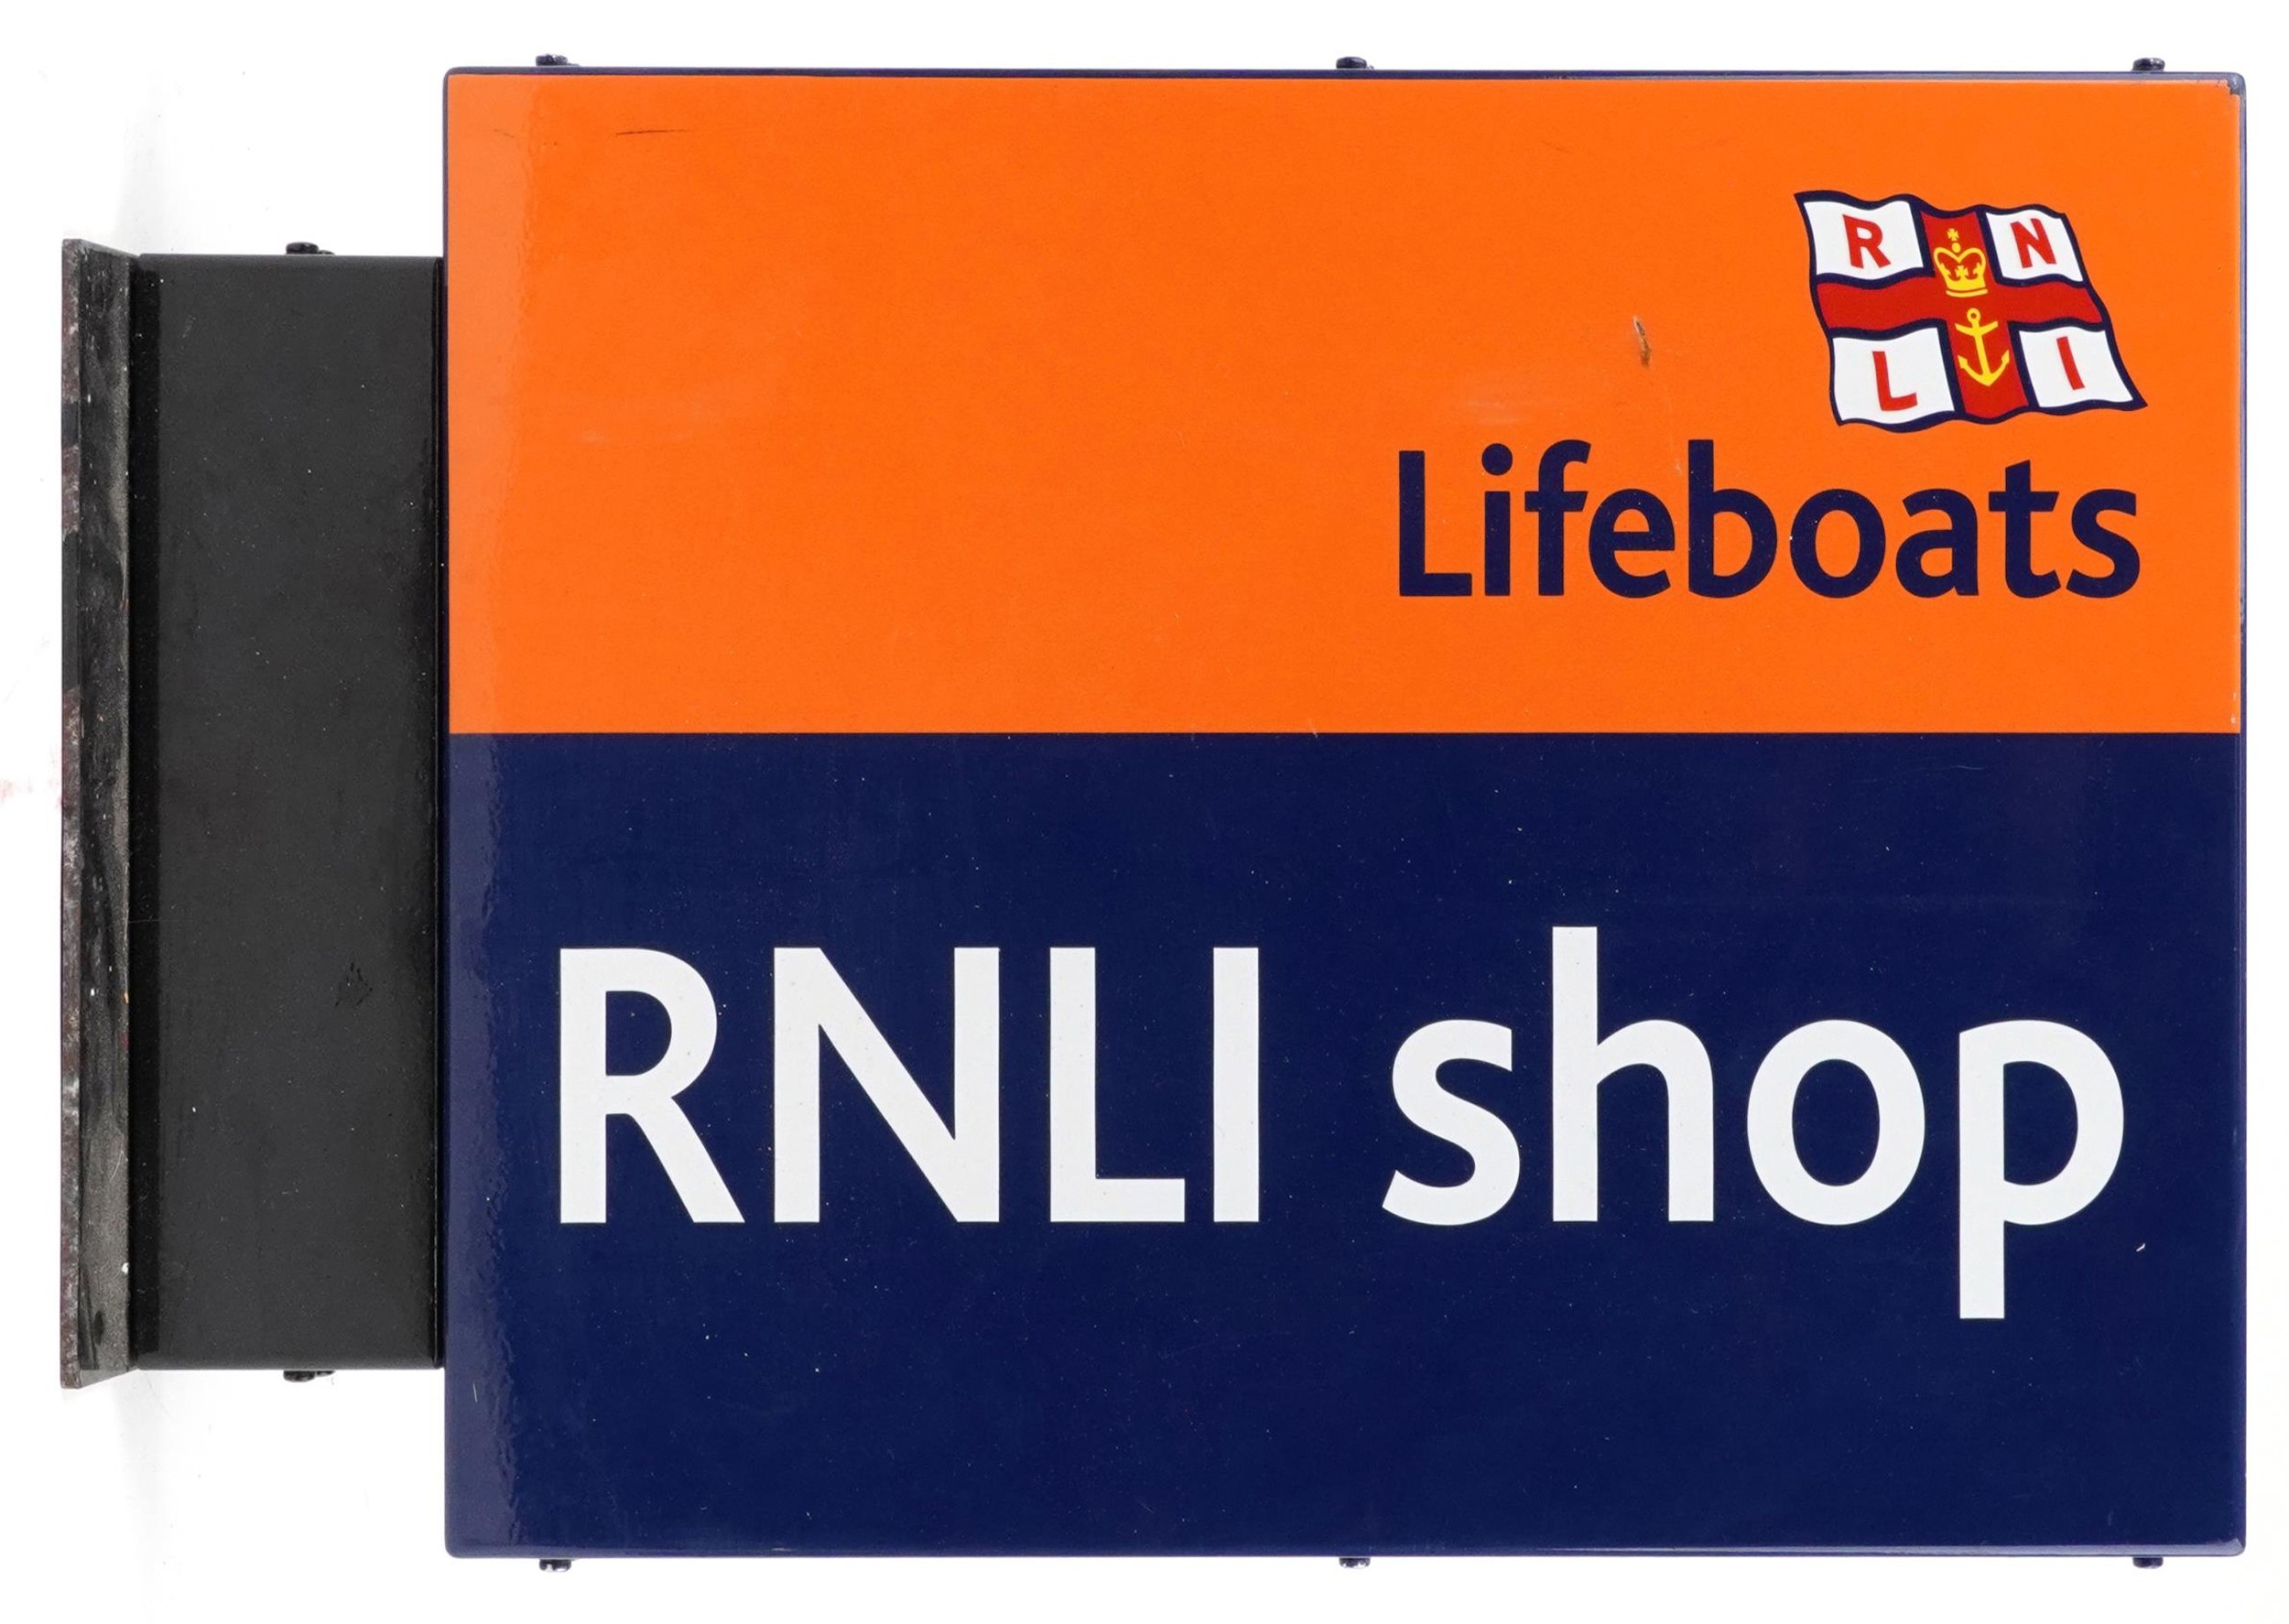 Royal National Lifeboat Association RNLI Shop double sided metal advertising sign, 65cm x 41.5cm - Image 2 of 3